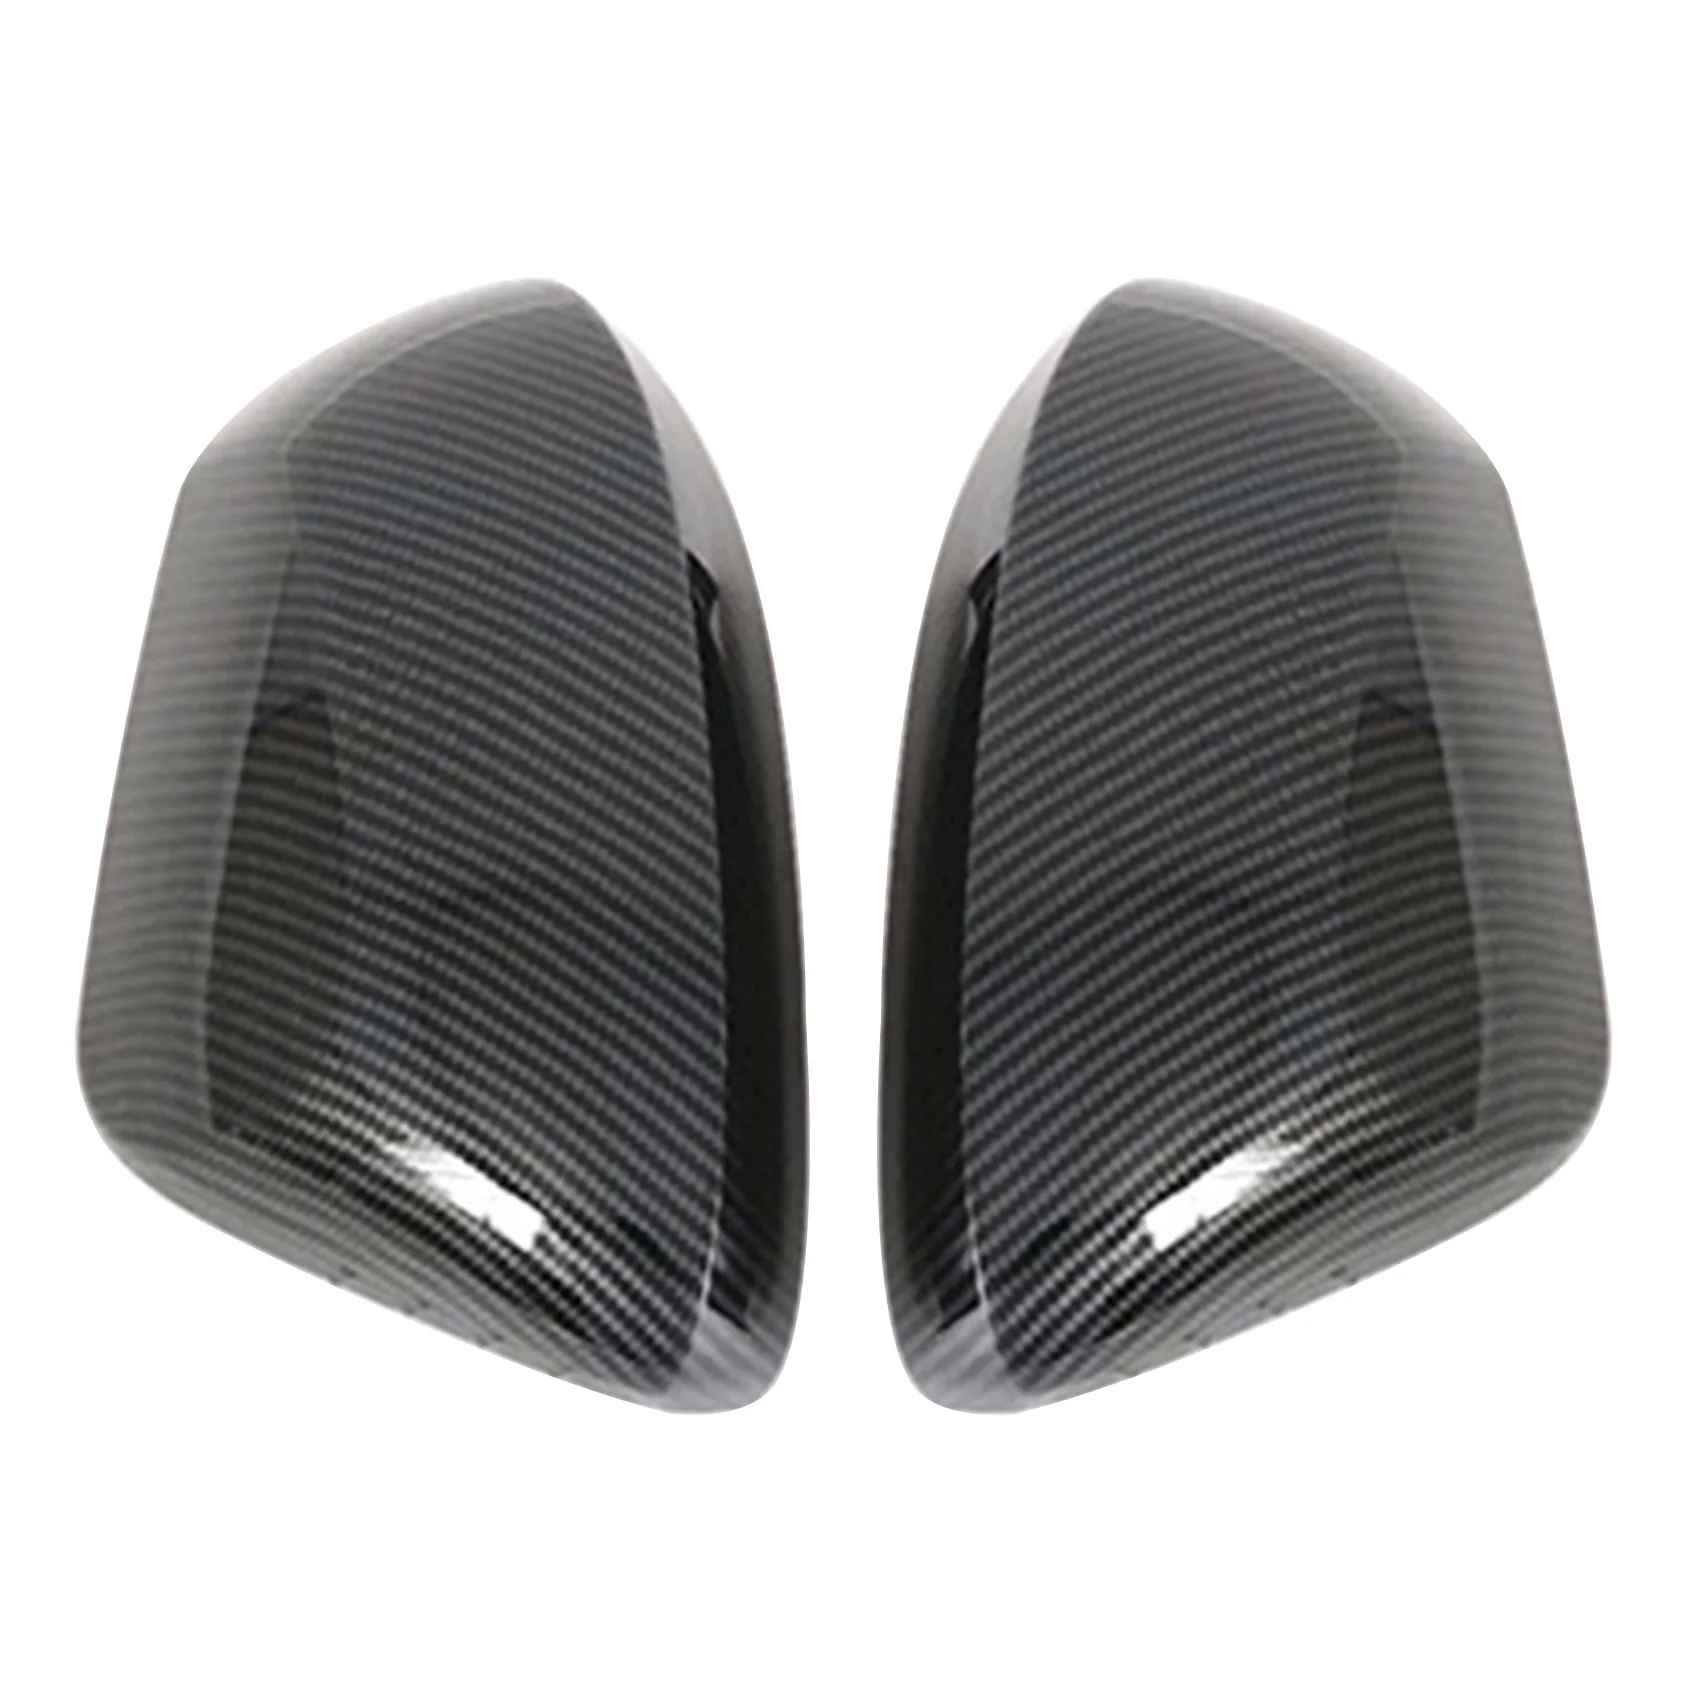 

Car Carbon Fiber Rear View Mirror Cover Trim Side Wing Mirror Caps for Toyota Corolla Levin 2019-2021